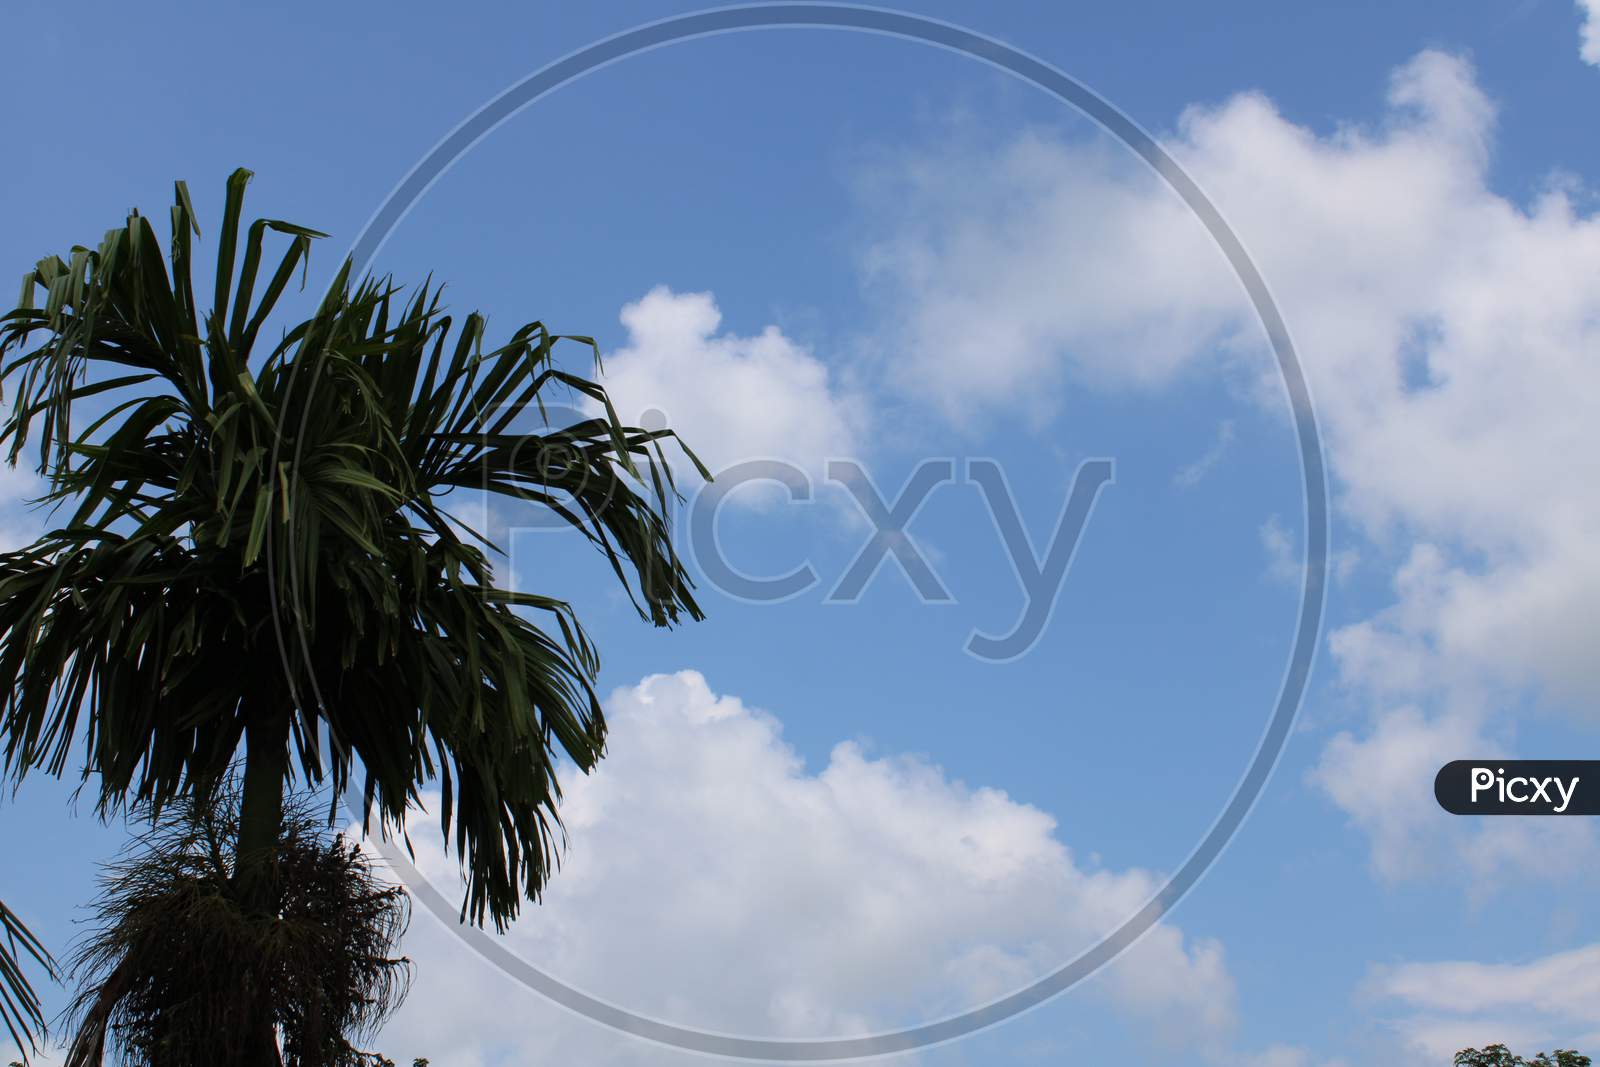 Tree with sky background photo capture